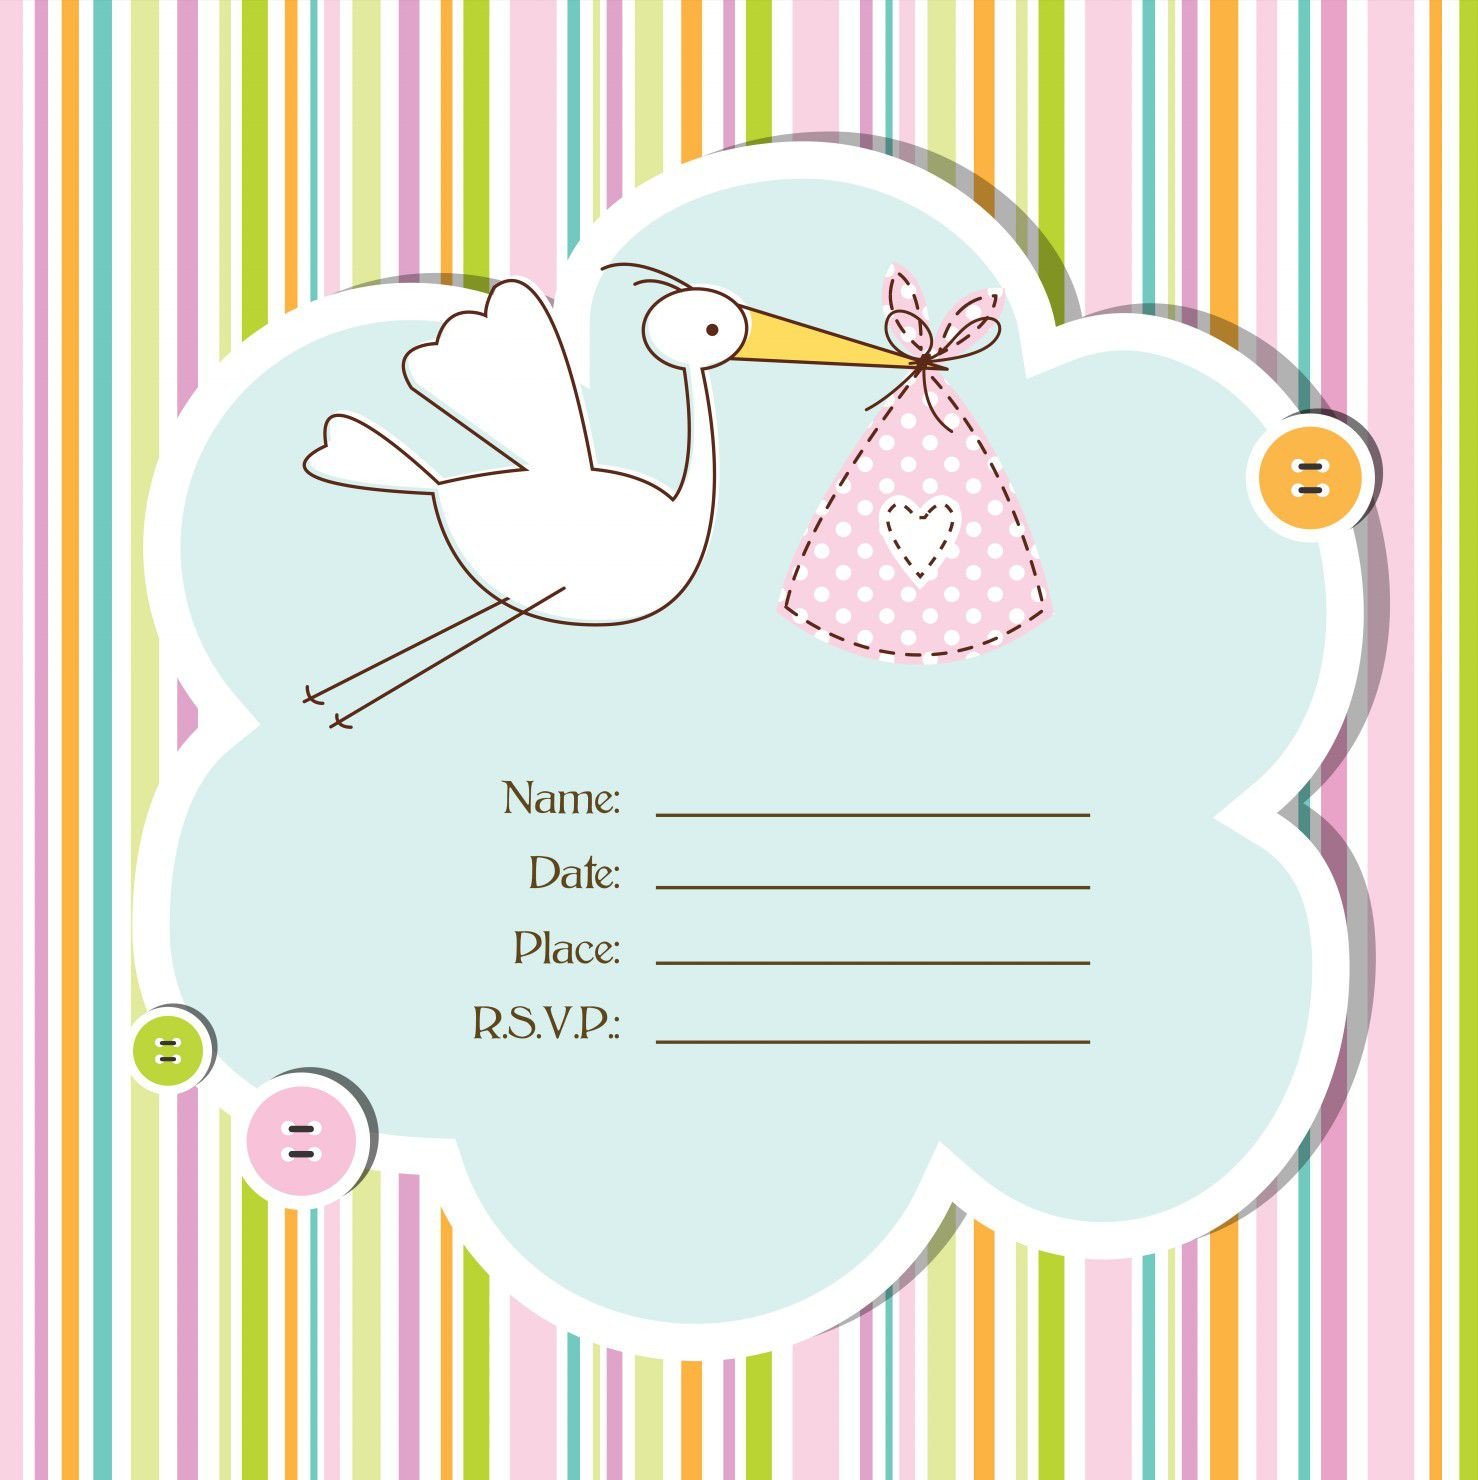 Baby Shower Card Template Baby Shower Invitations Cards Designs Baby Shower